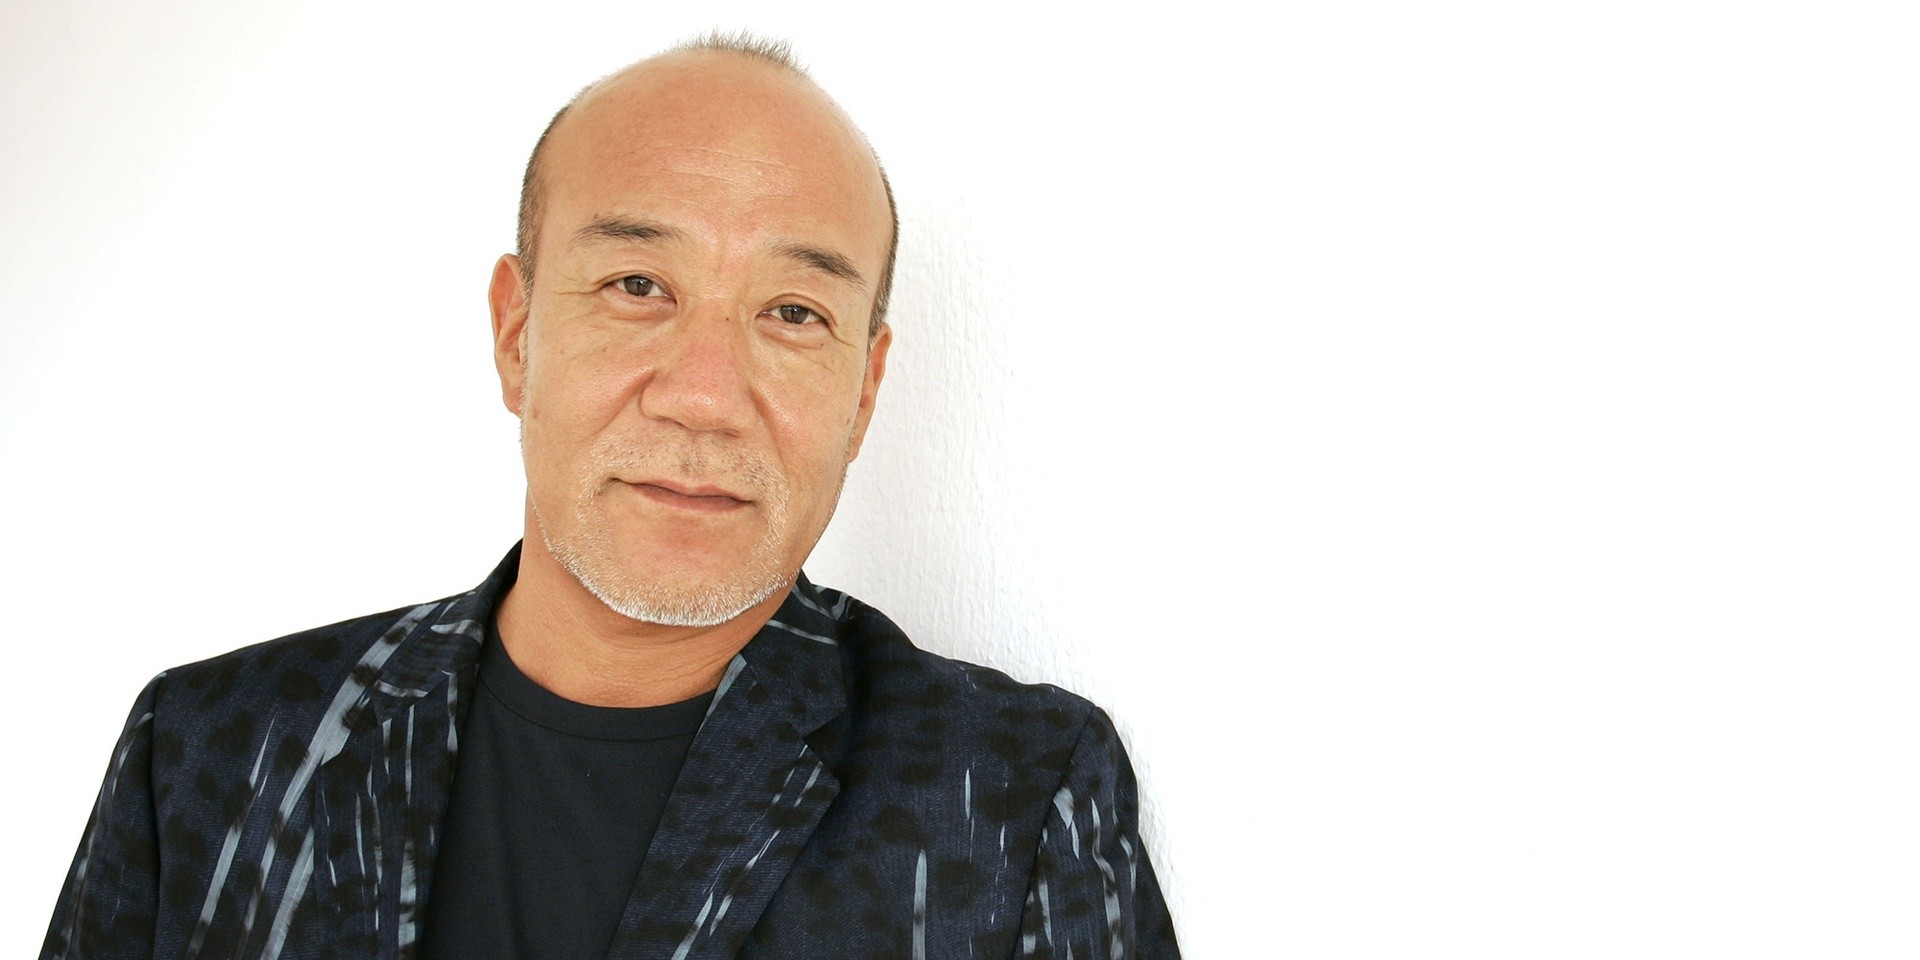 Joe Hisaishi to perform in Singapore next year with the Singapore Symphony Orchestra 